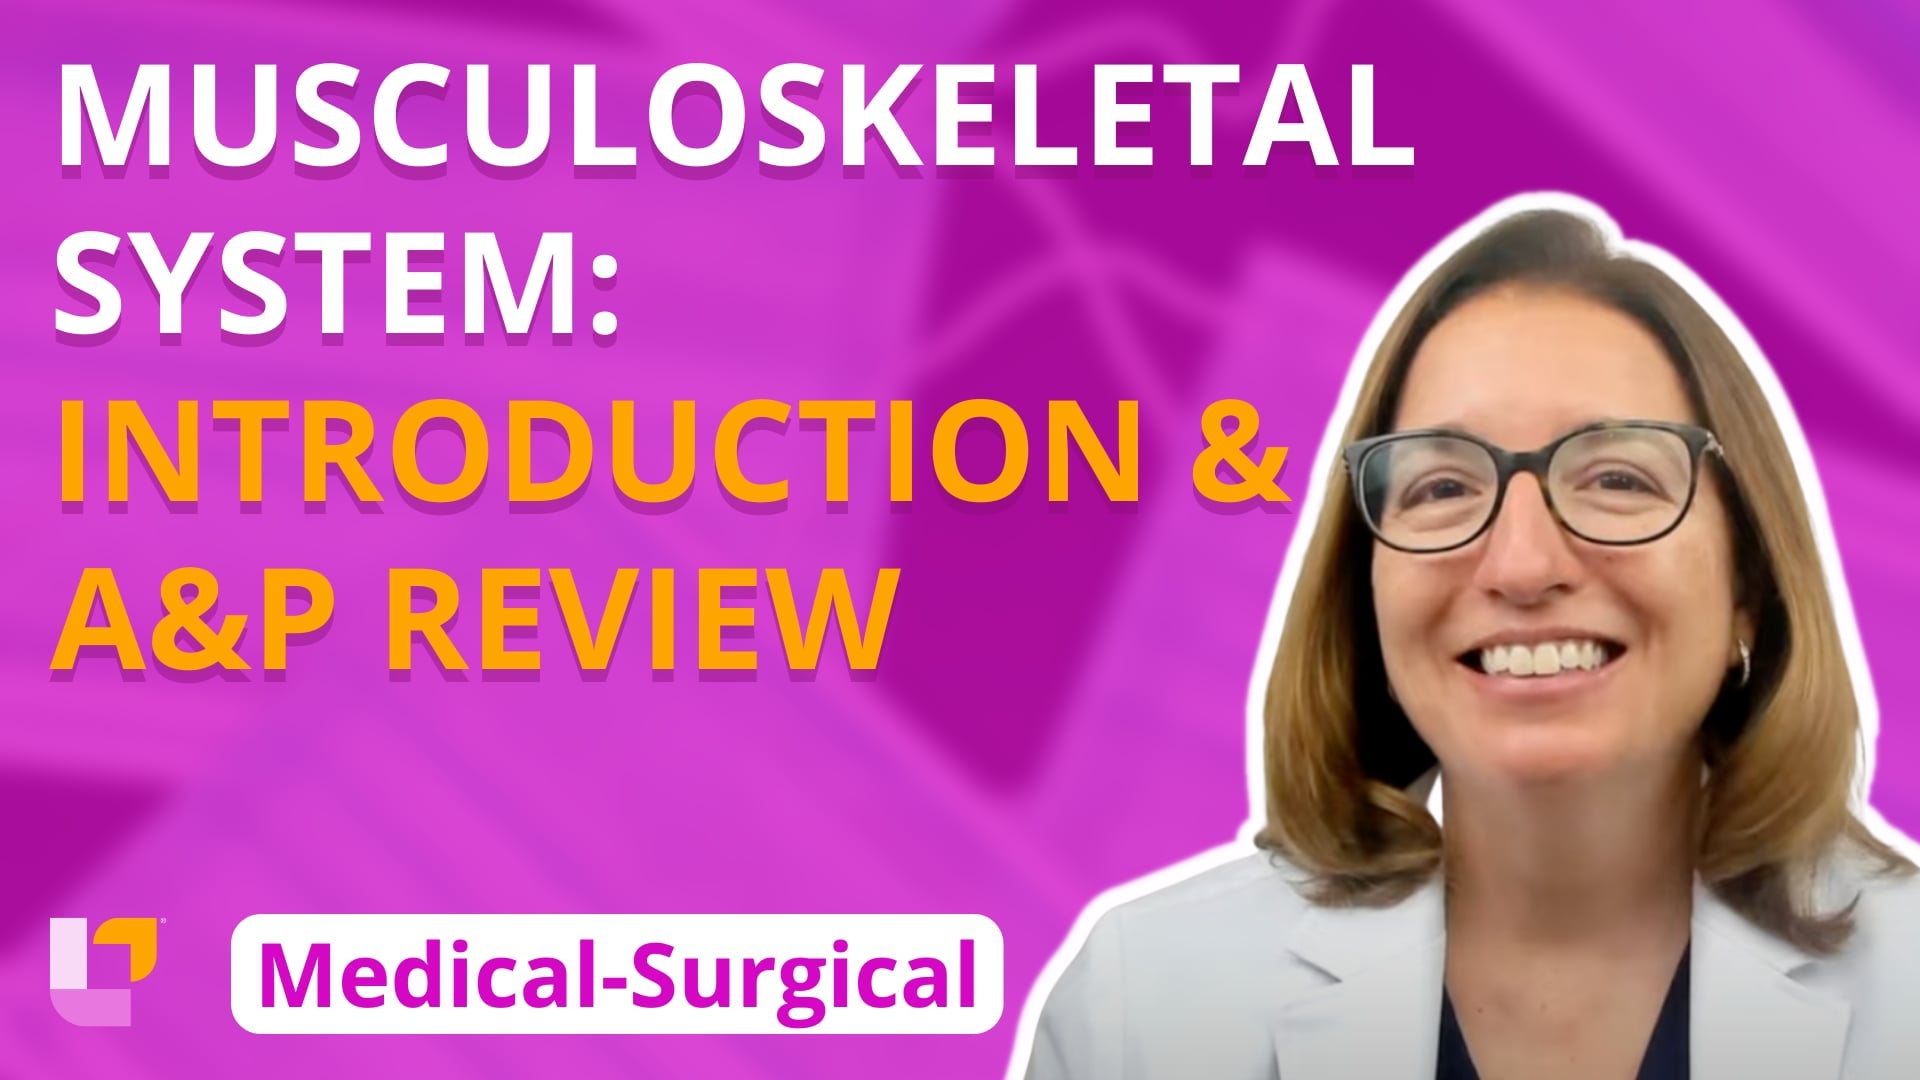 Med-Surg - Musculoskeletal System, part 1: Introduction, Anatomy/Physiology Review - LevelUpRN